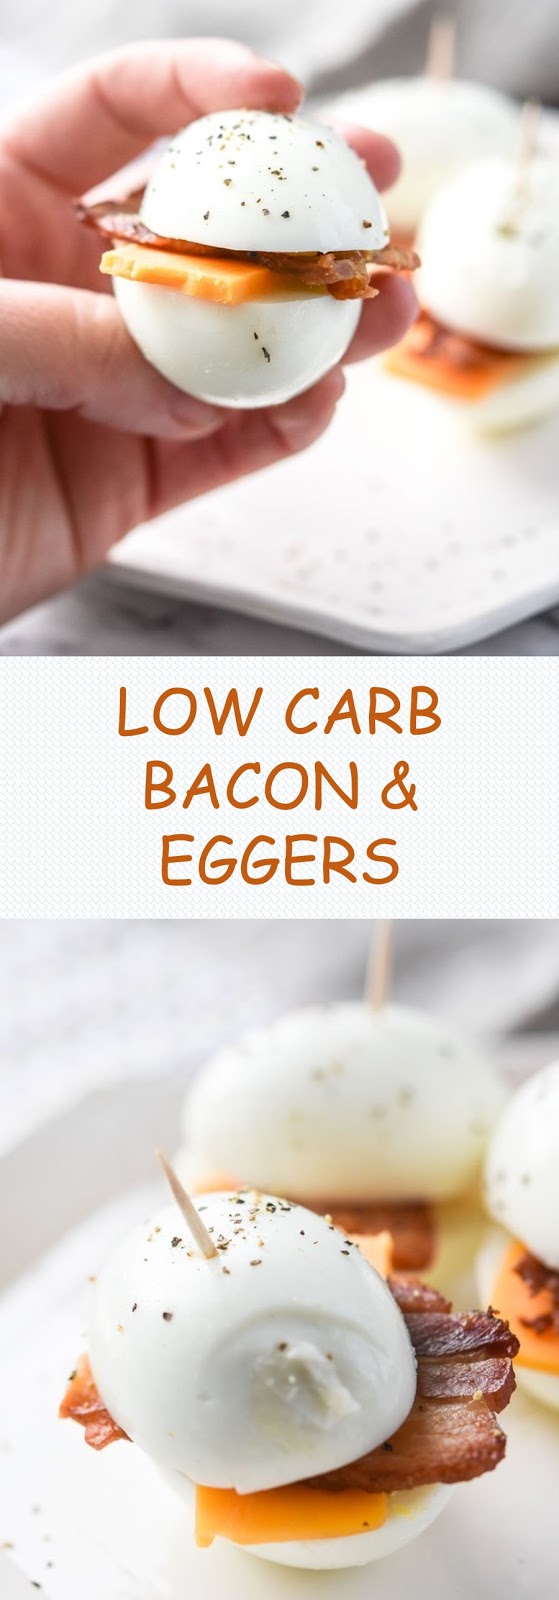 LOW CARB BACON & EGGERS